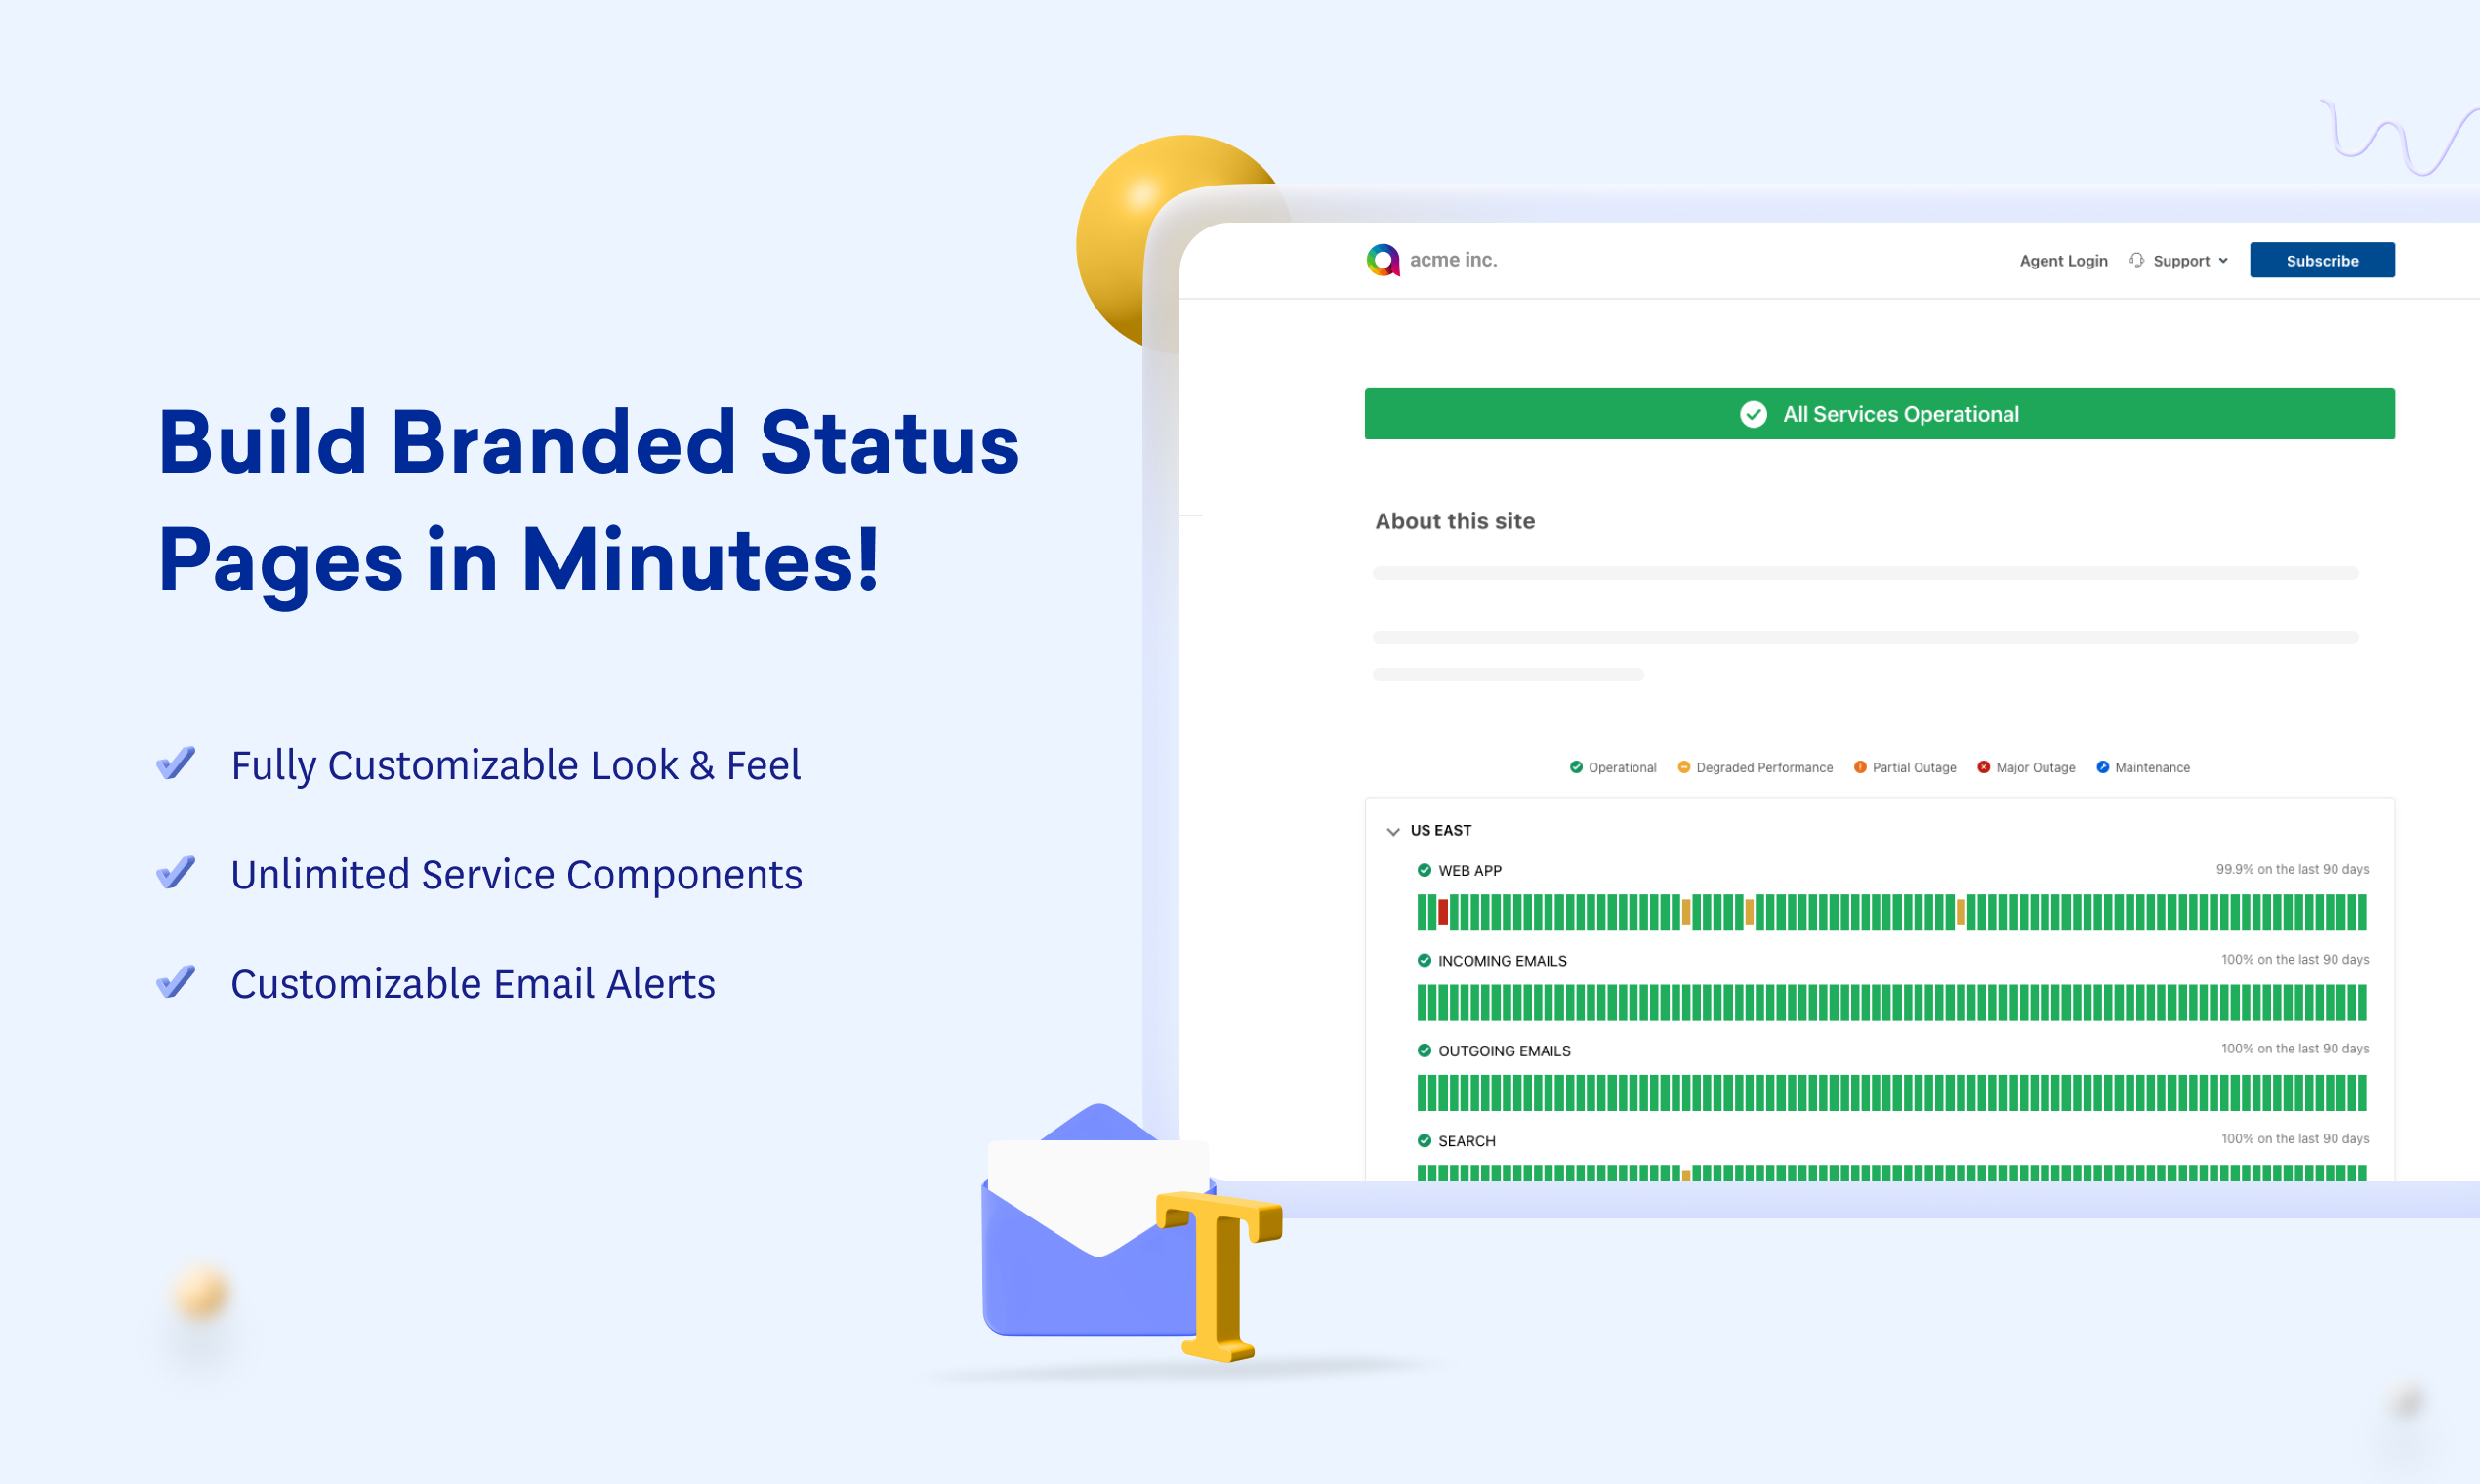 Build Branded Status Pages in minutes